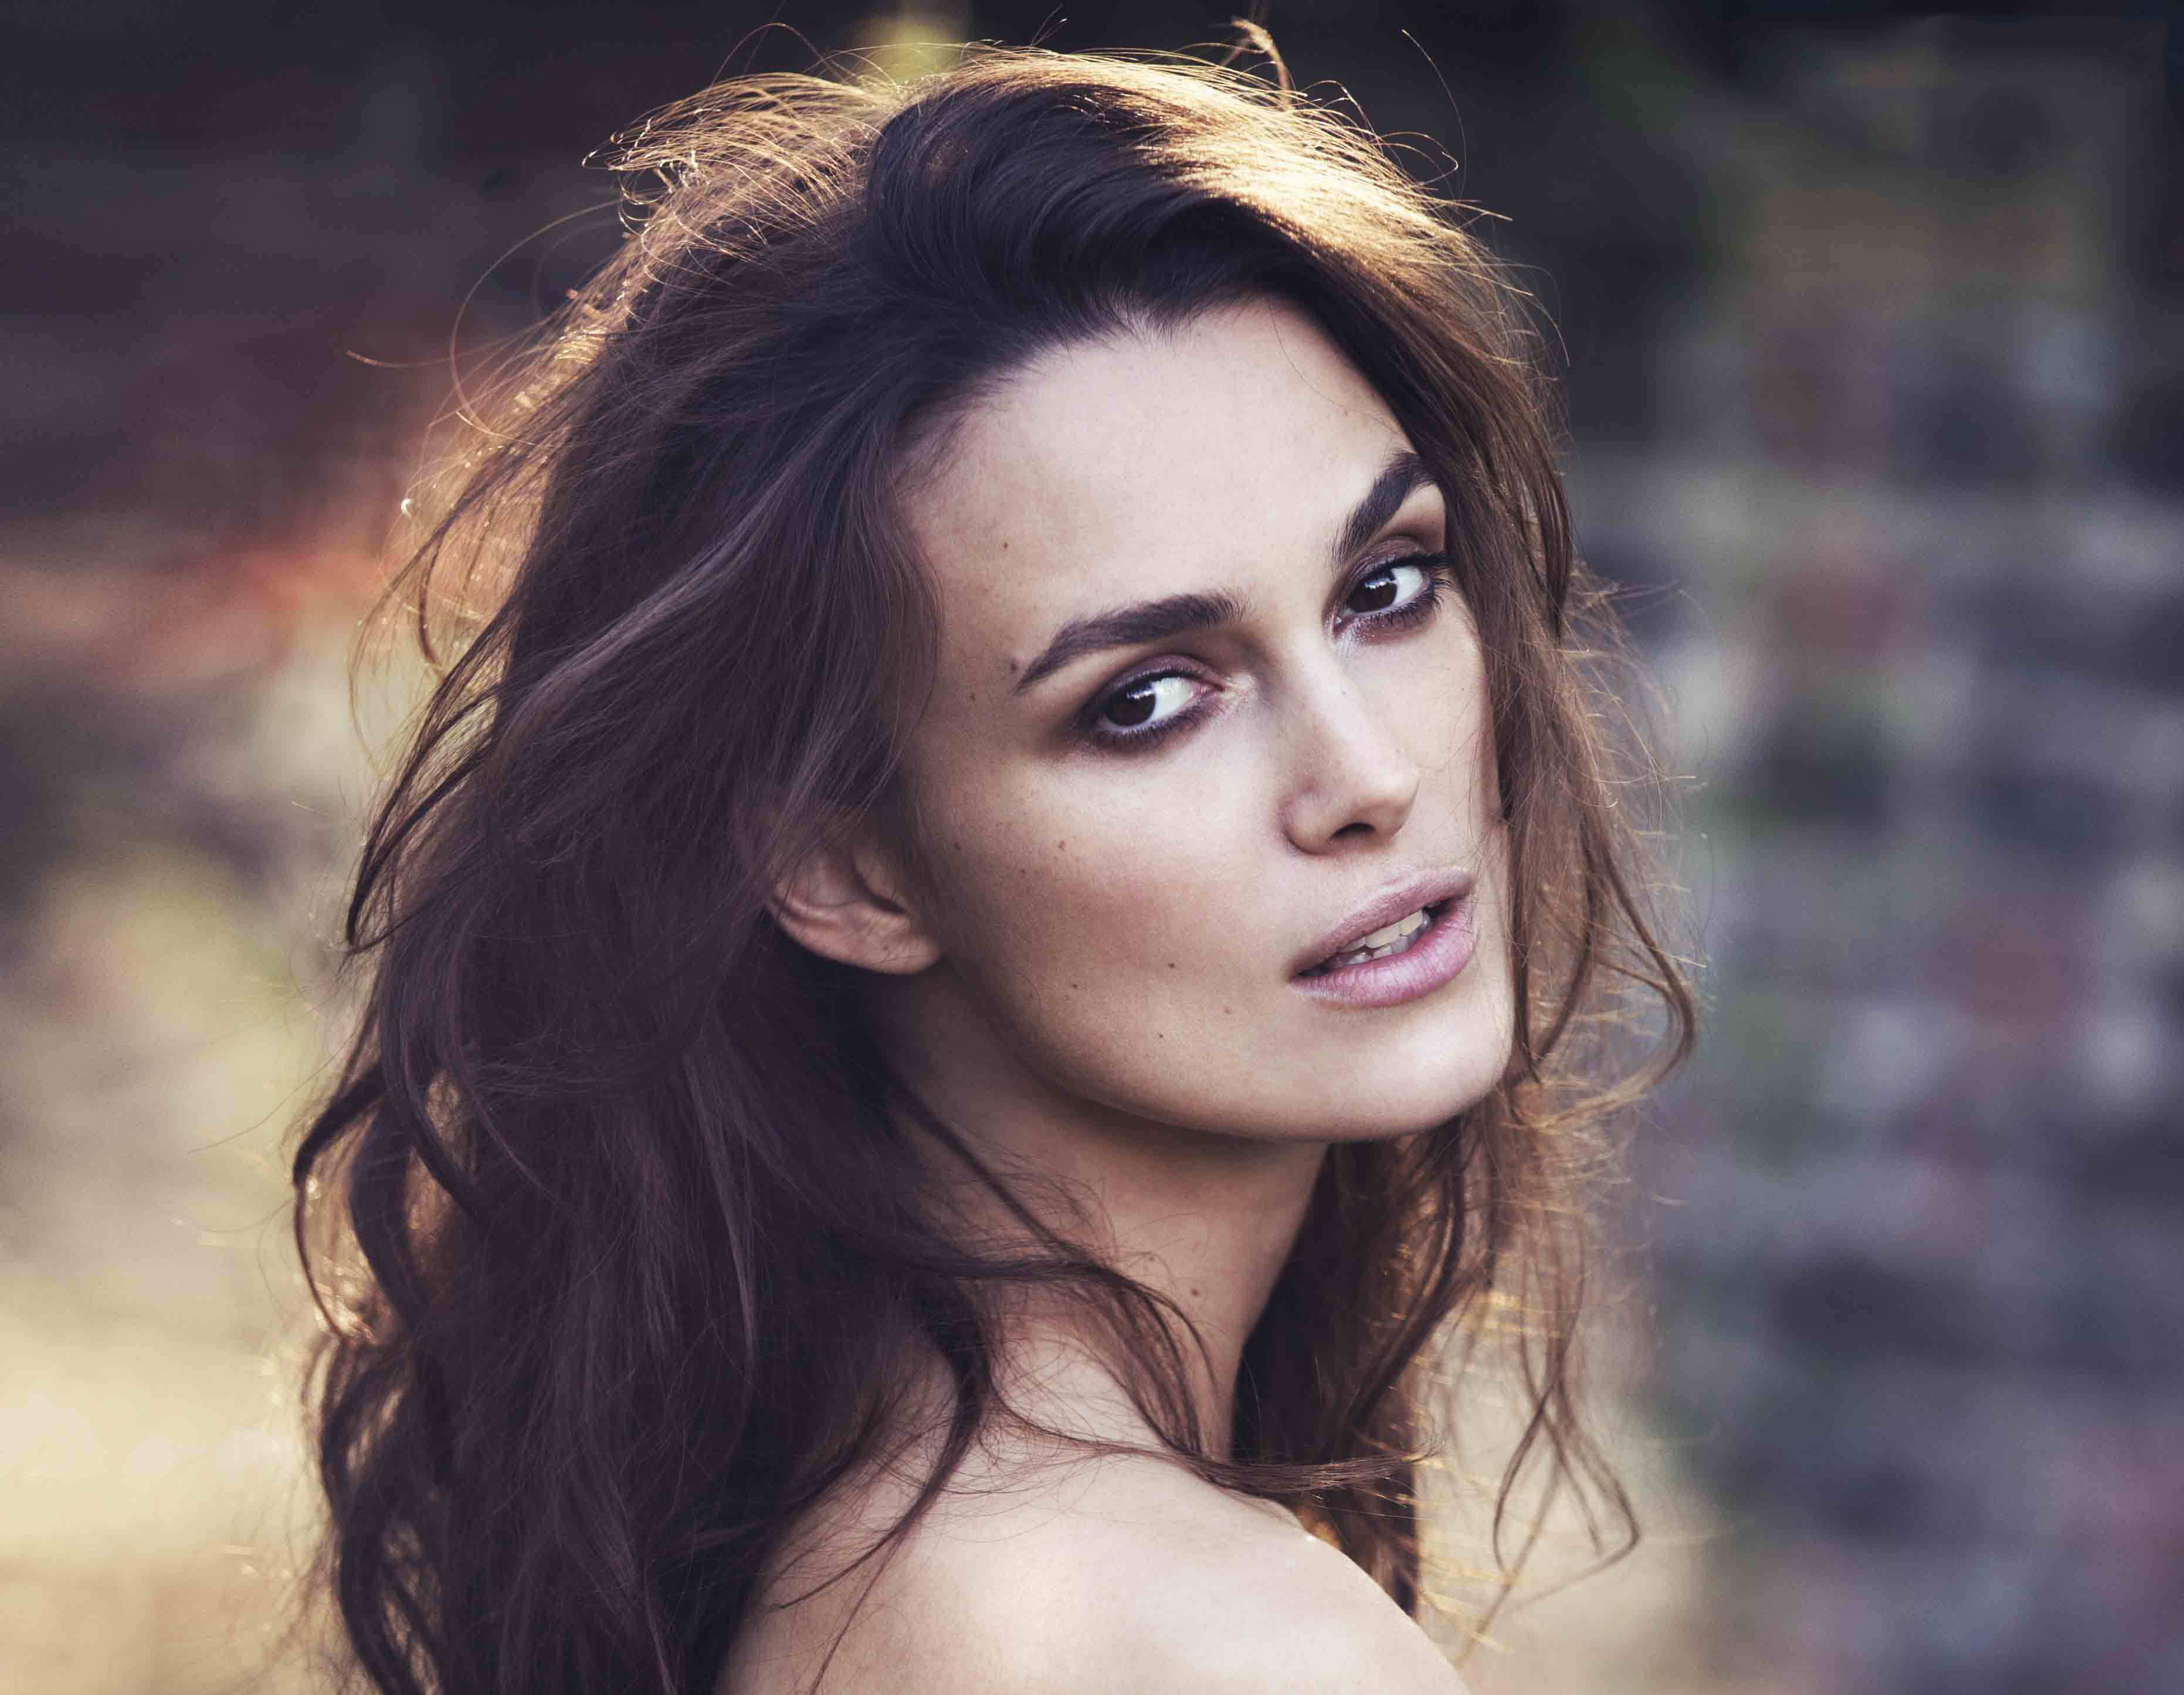 Keira Knightley Wallpapers Images Photos Pictures Backgrounds